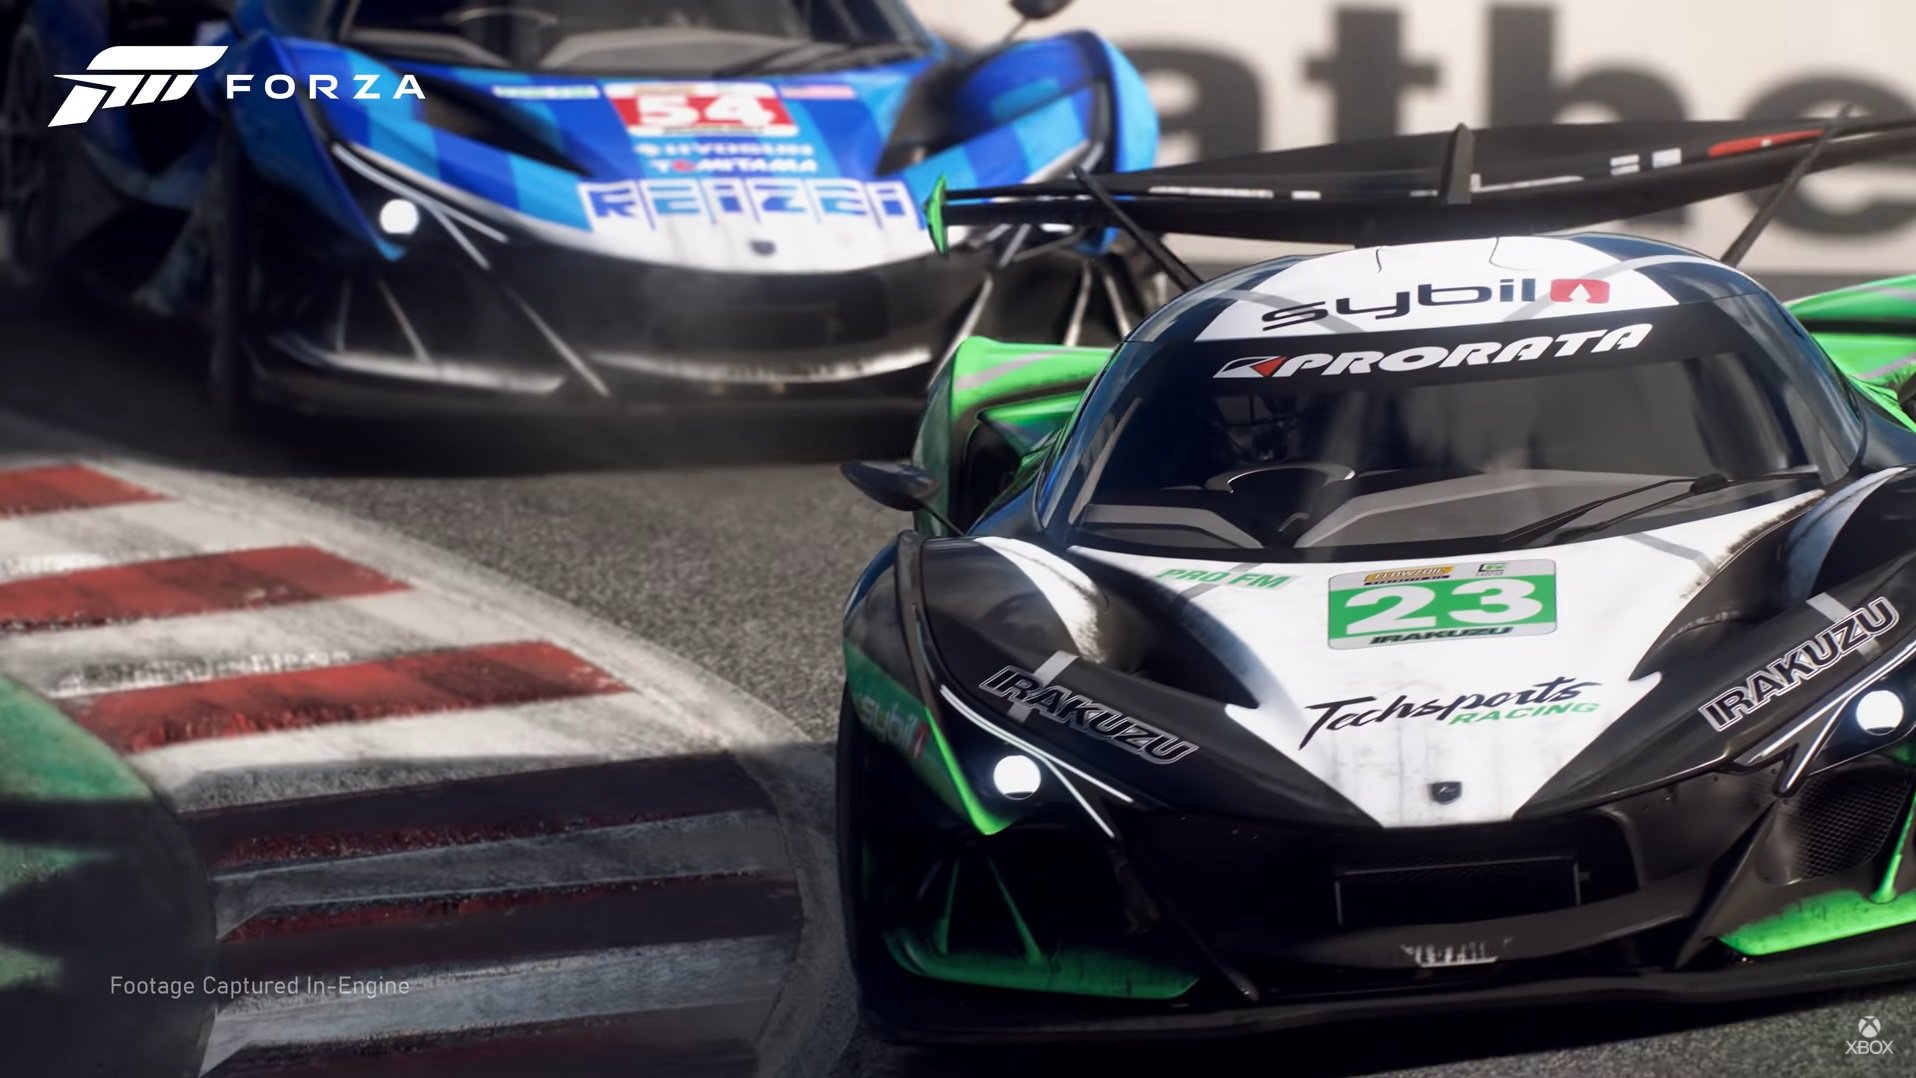 images claim to show Forza 8 running on Xbox One | VGC